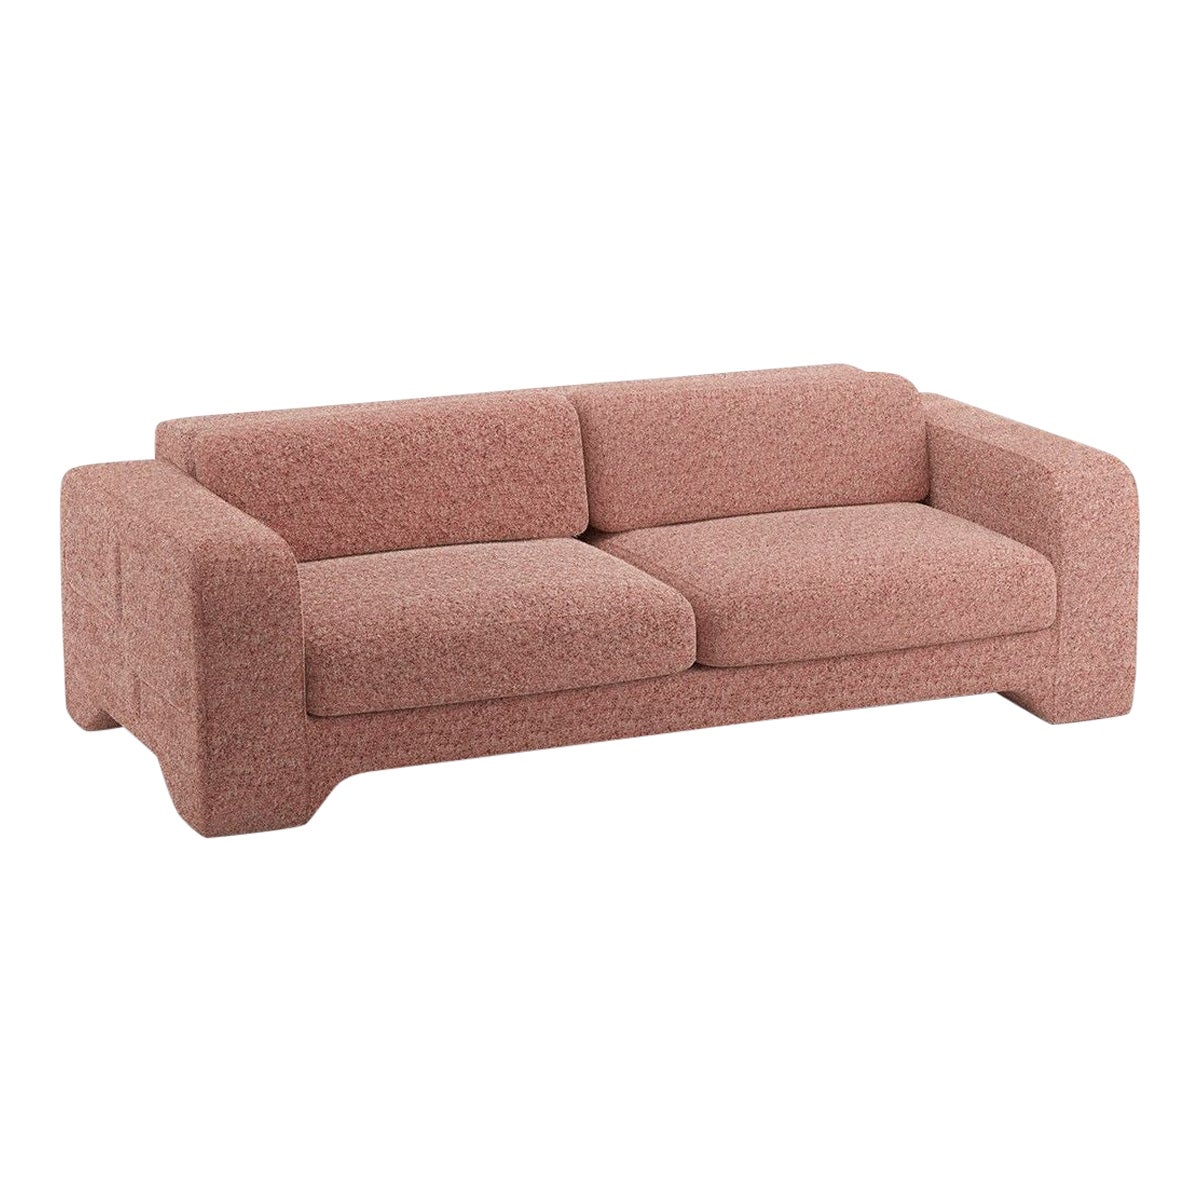 Popus Editions Giovanna 4 Seater Sofa in Sangria London Linen Fabric For Sale